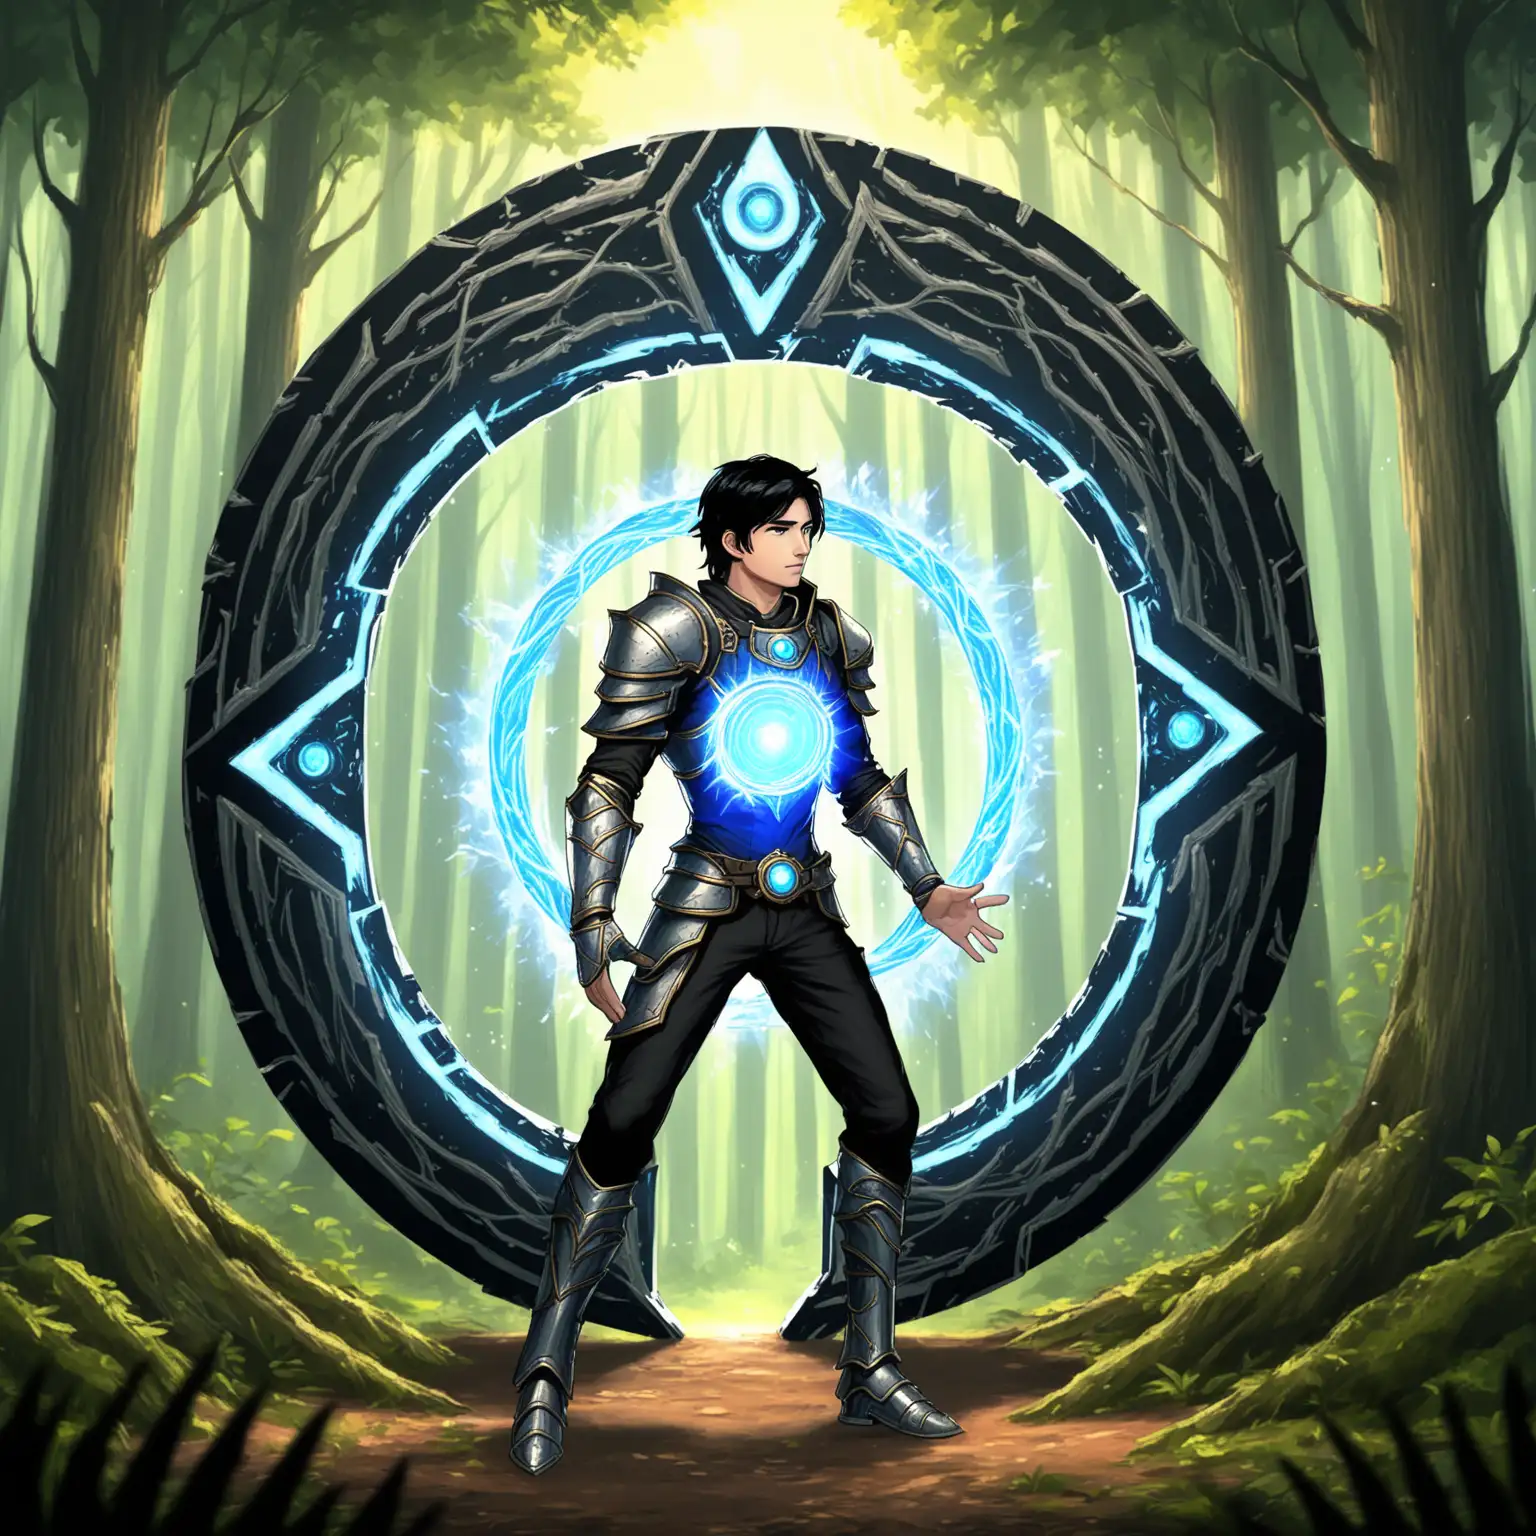 Adventurous Man in Portal with Magic in Forest